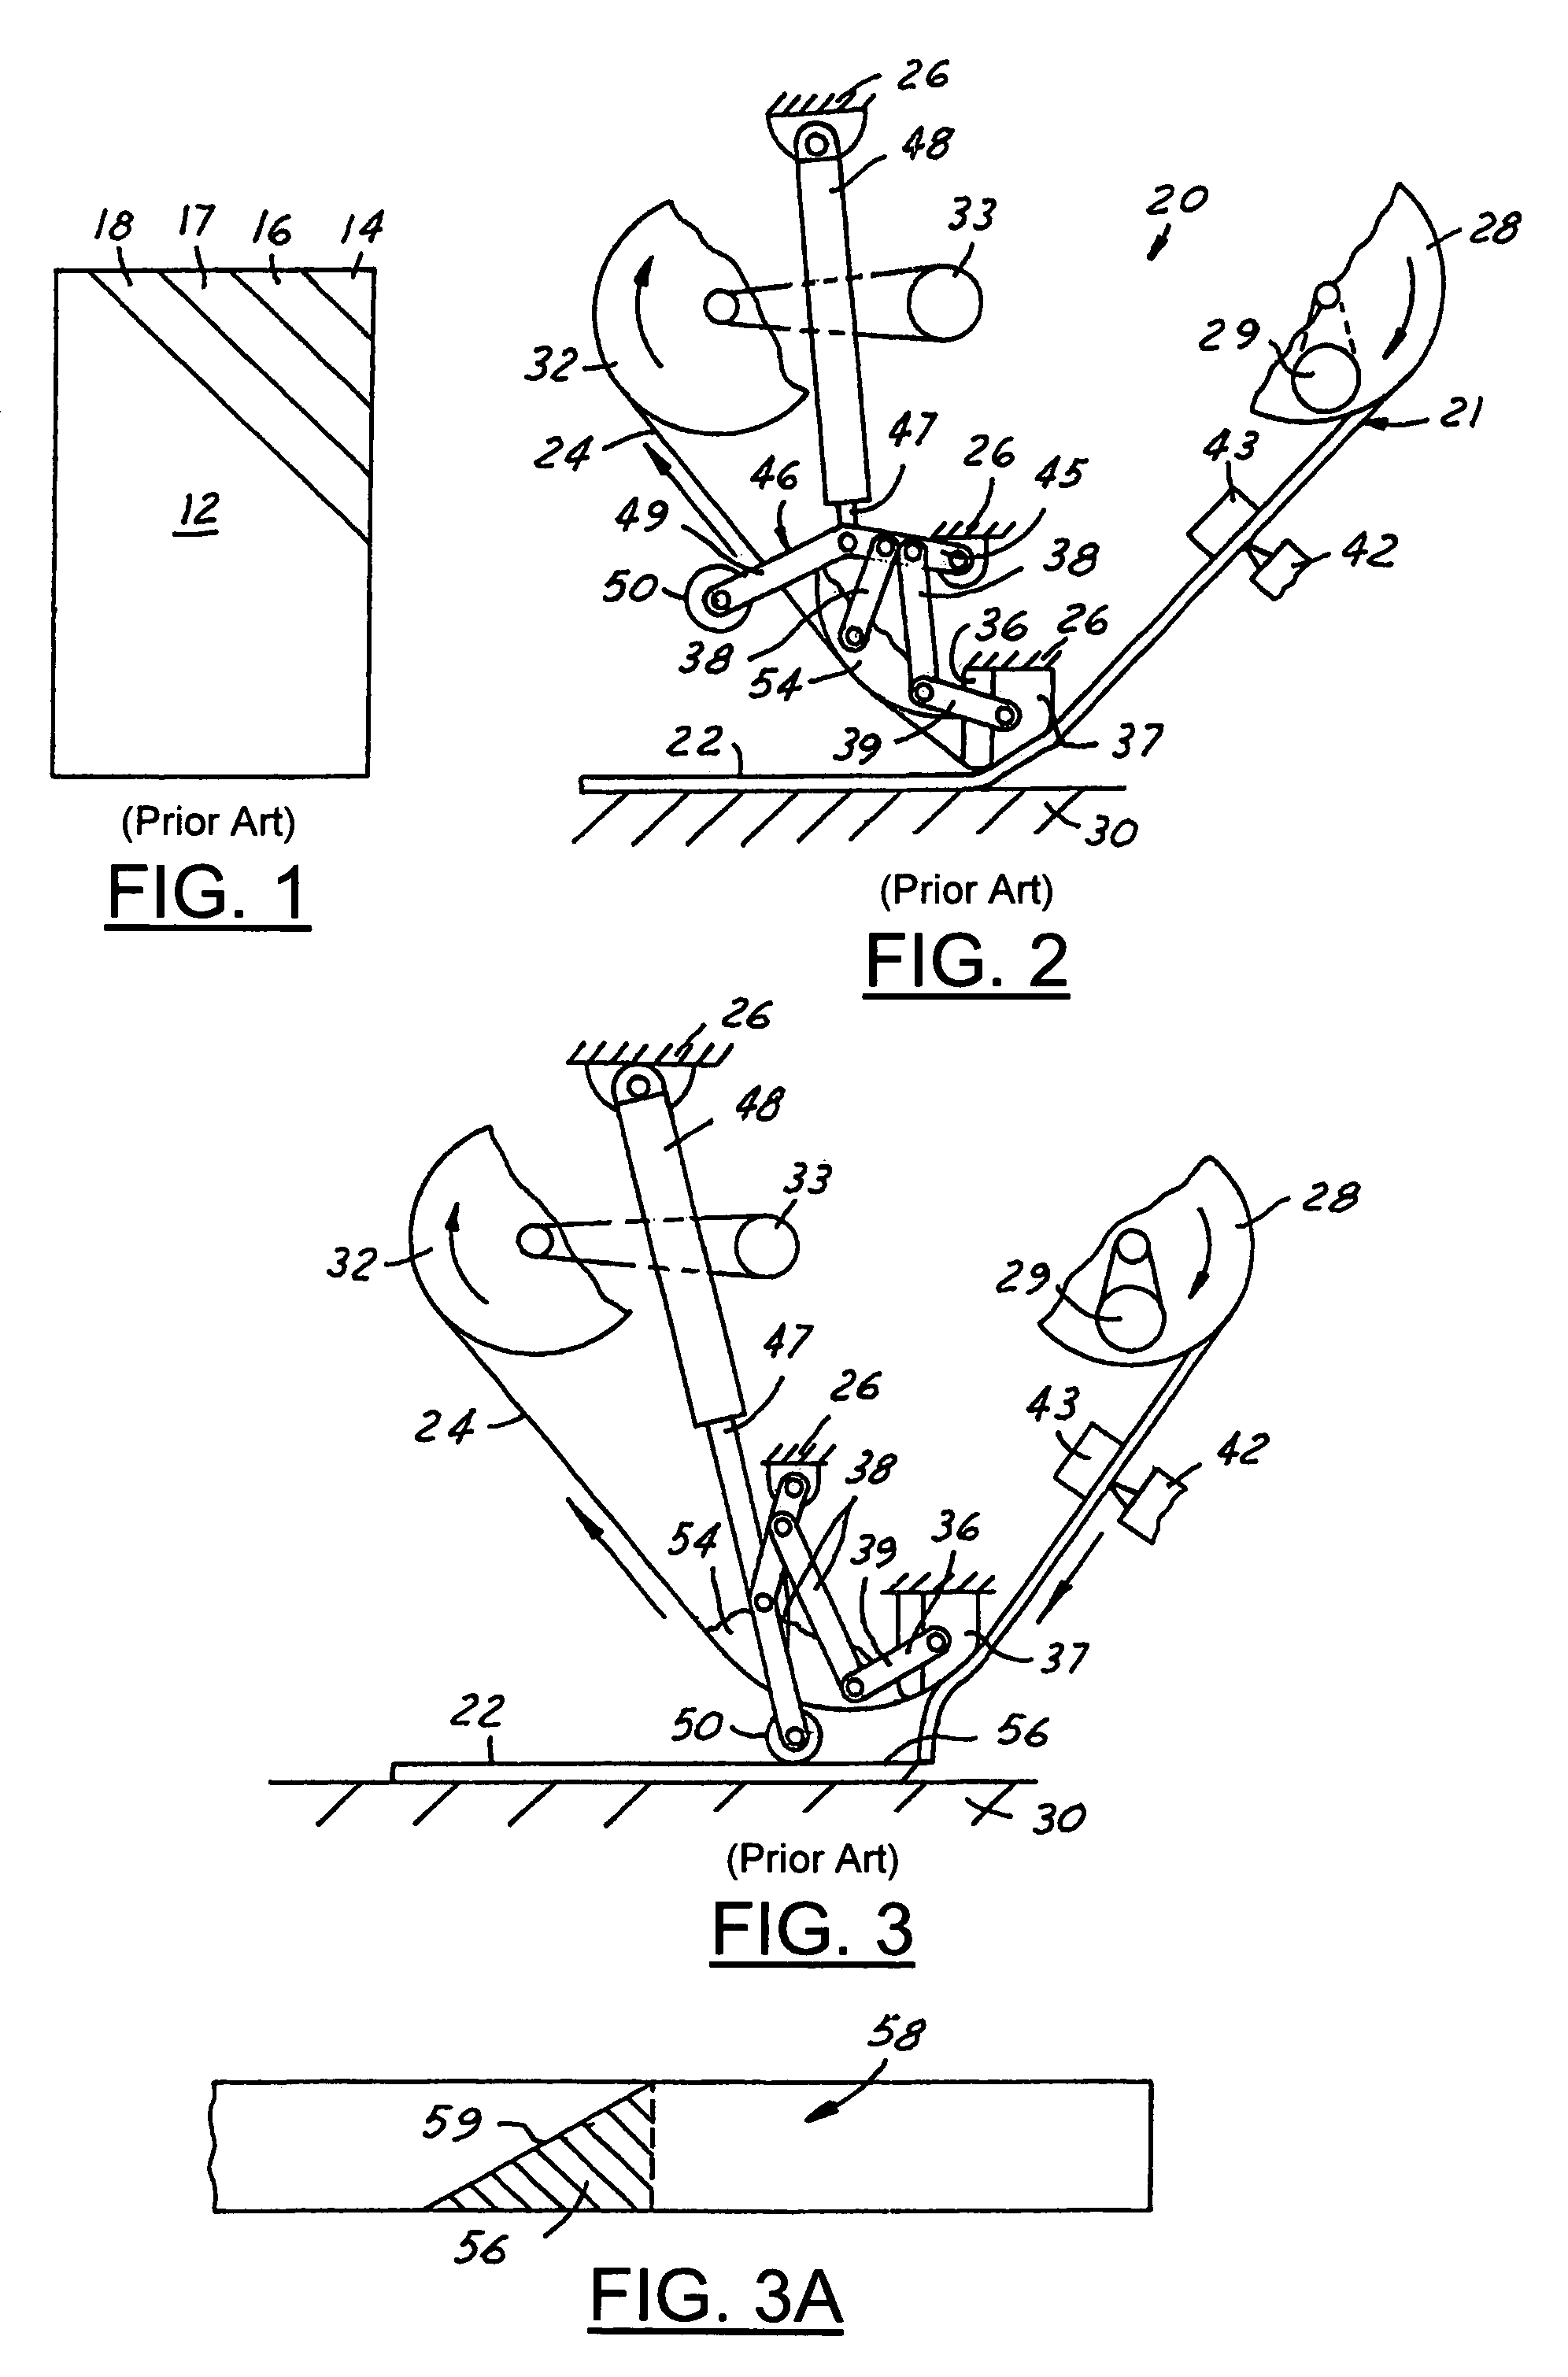 Process for laying fiber tape